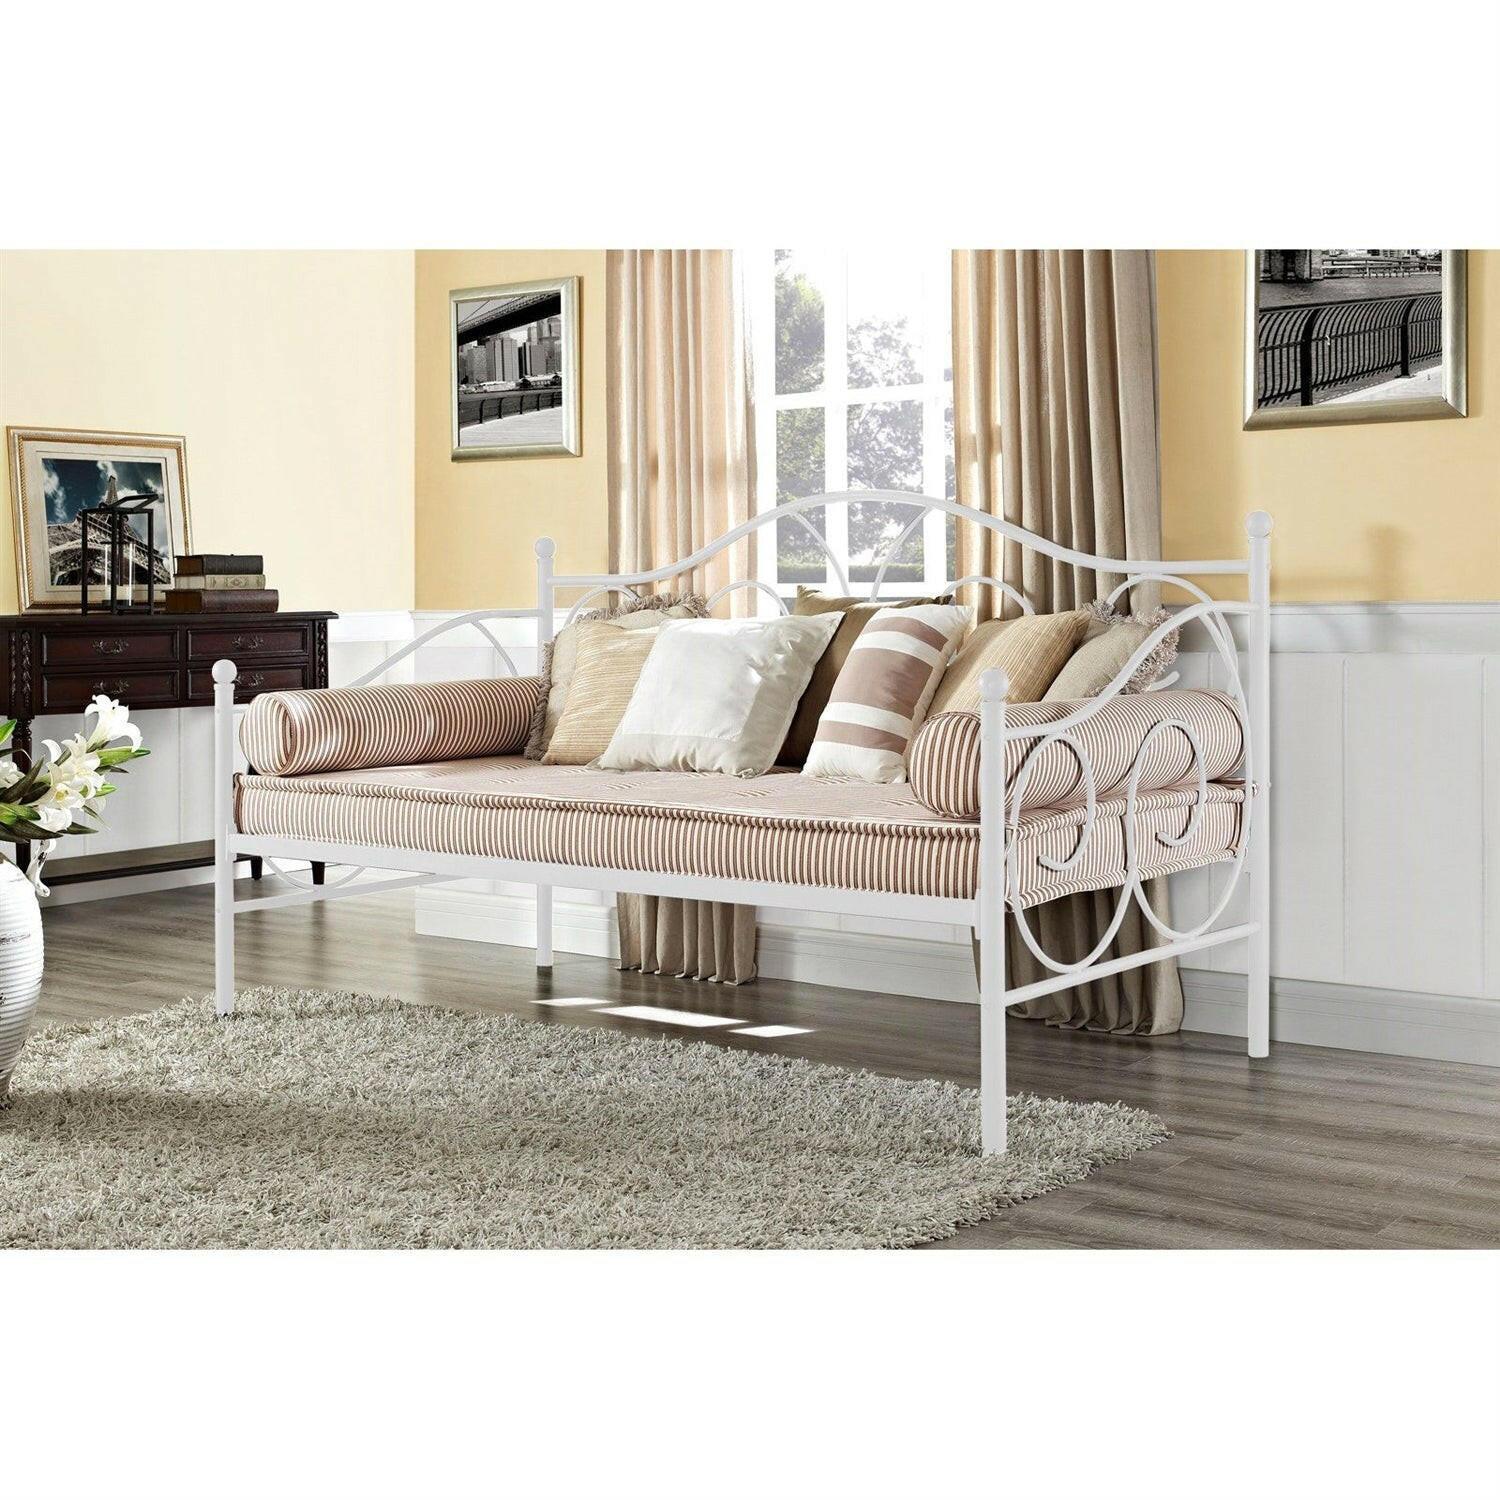 Twin White Metal Daybed with Scrolling Final Detailing - 600 lb Weight Limit - FurniFindUSA